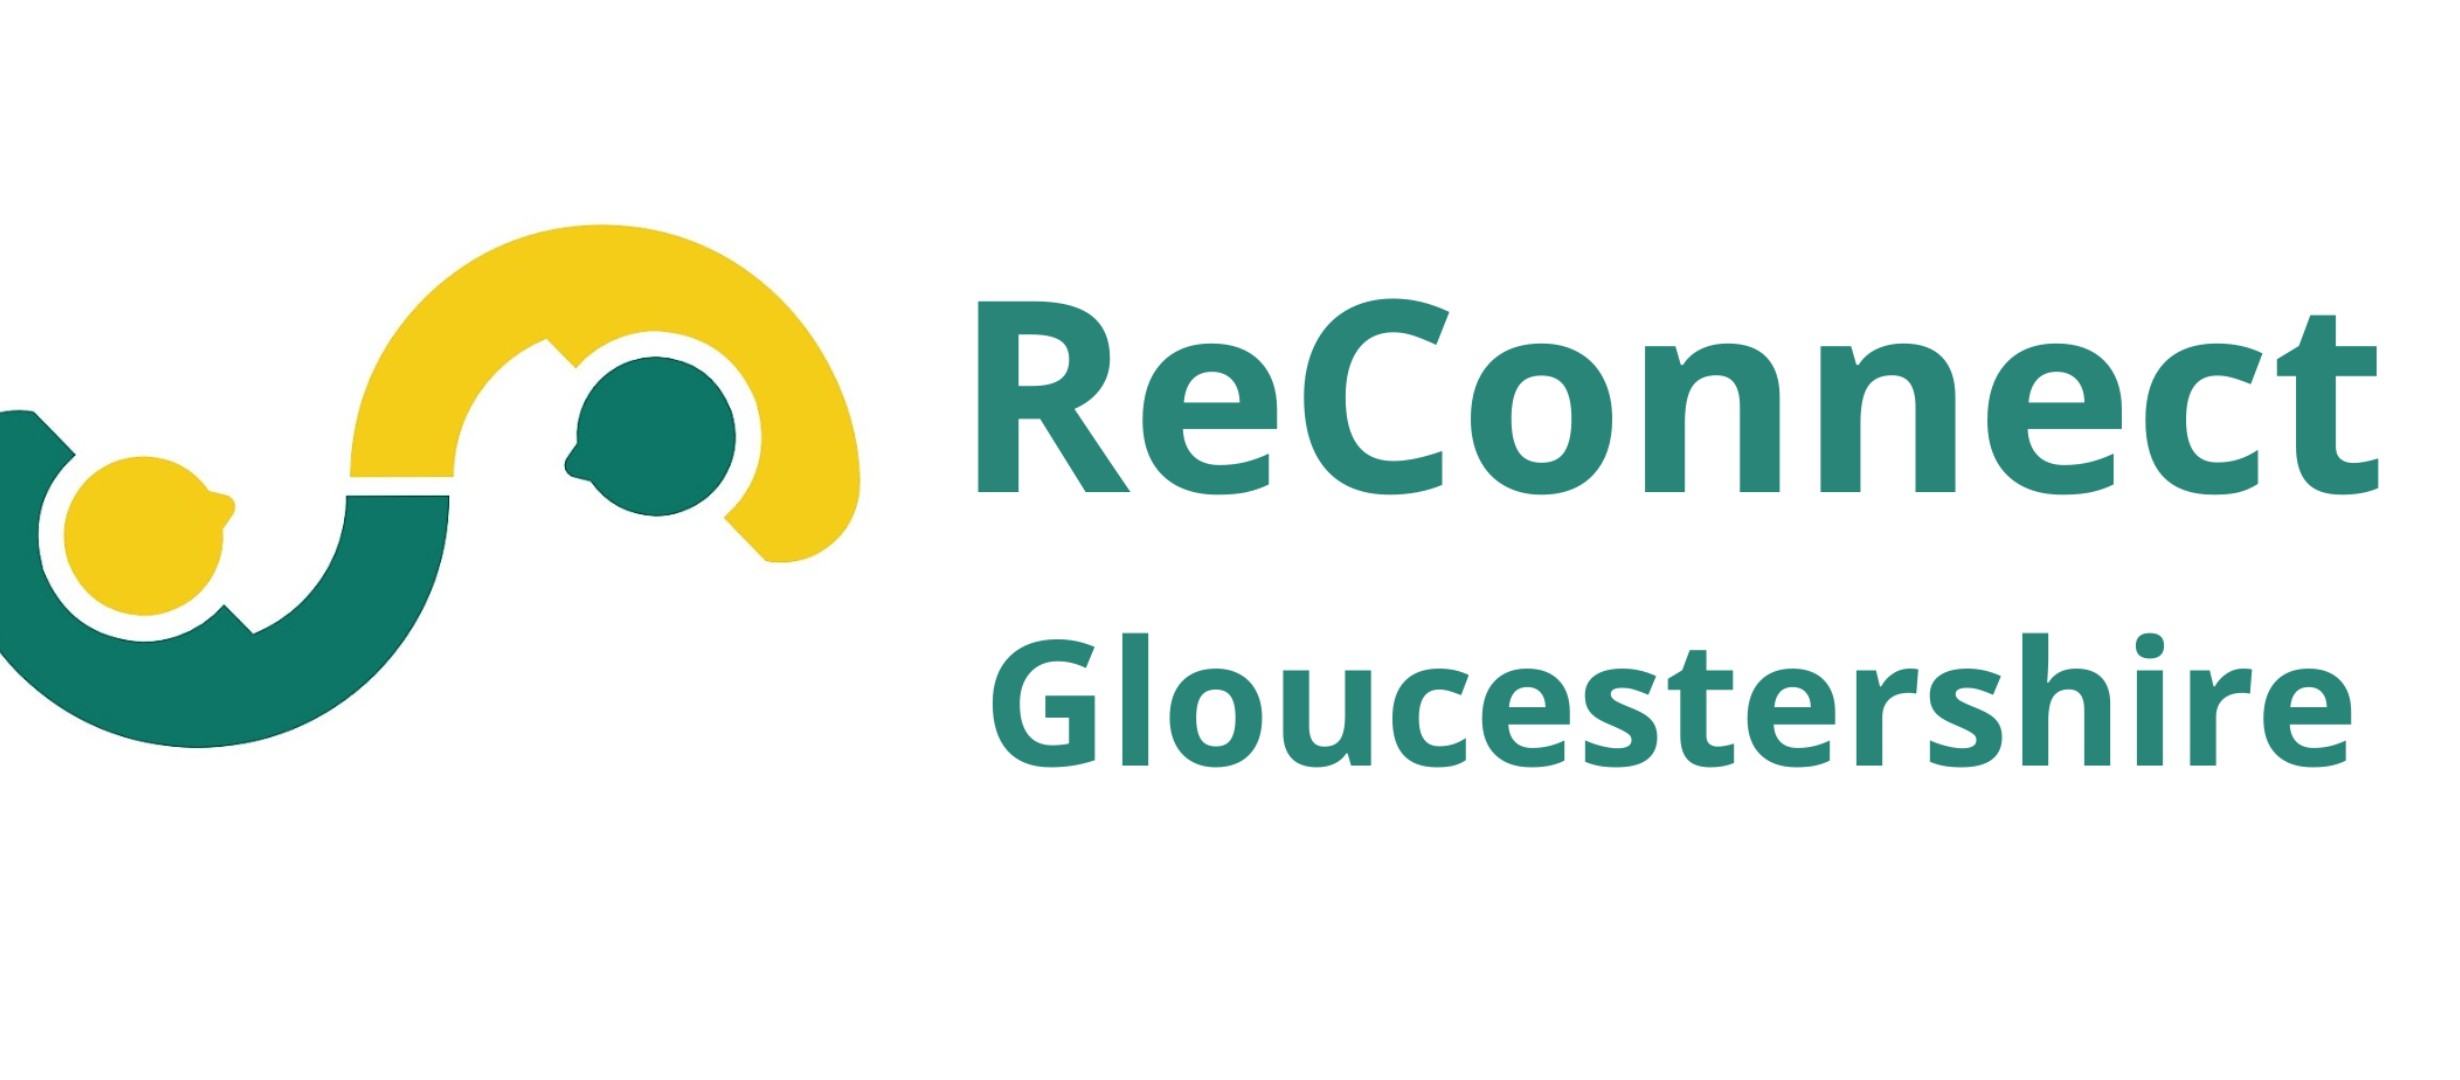 ReConnect Gloucestershire logo